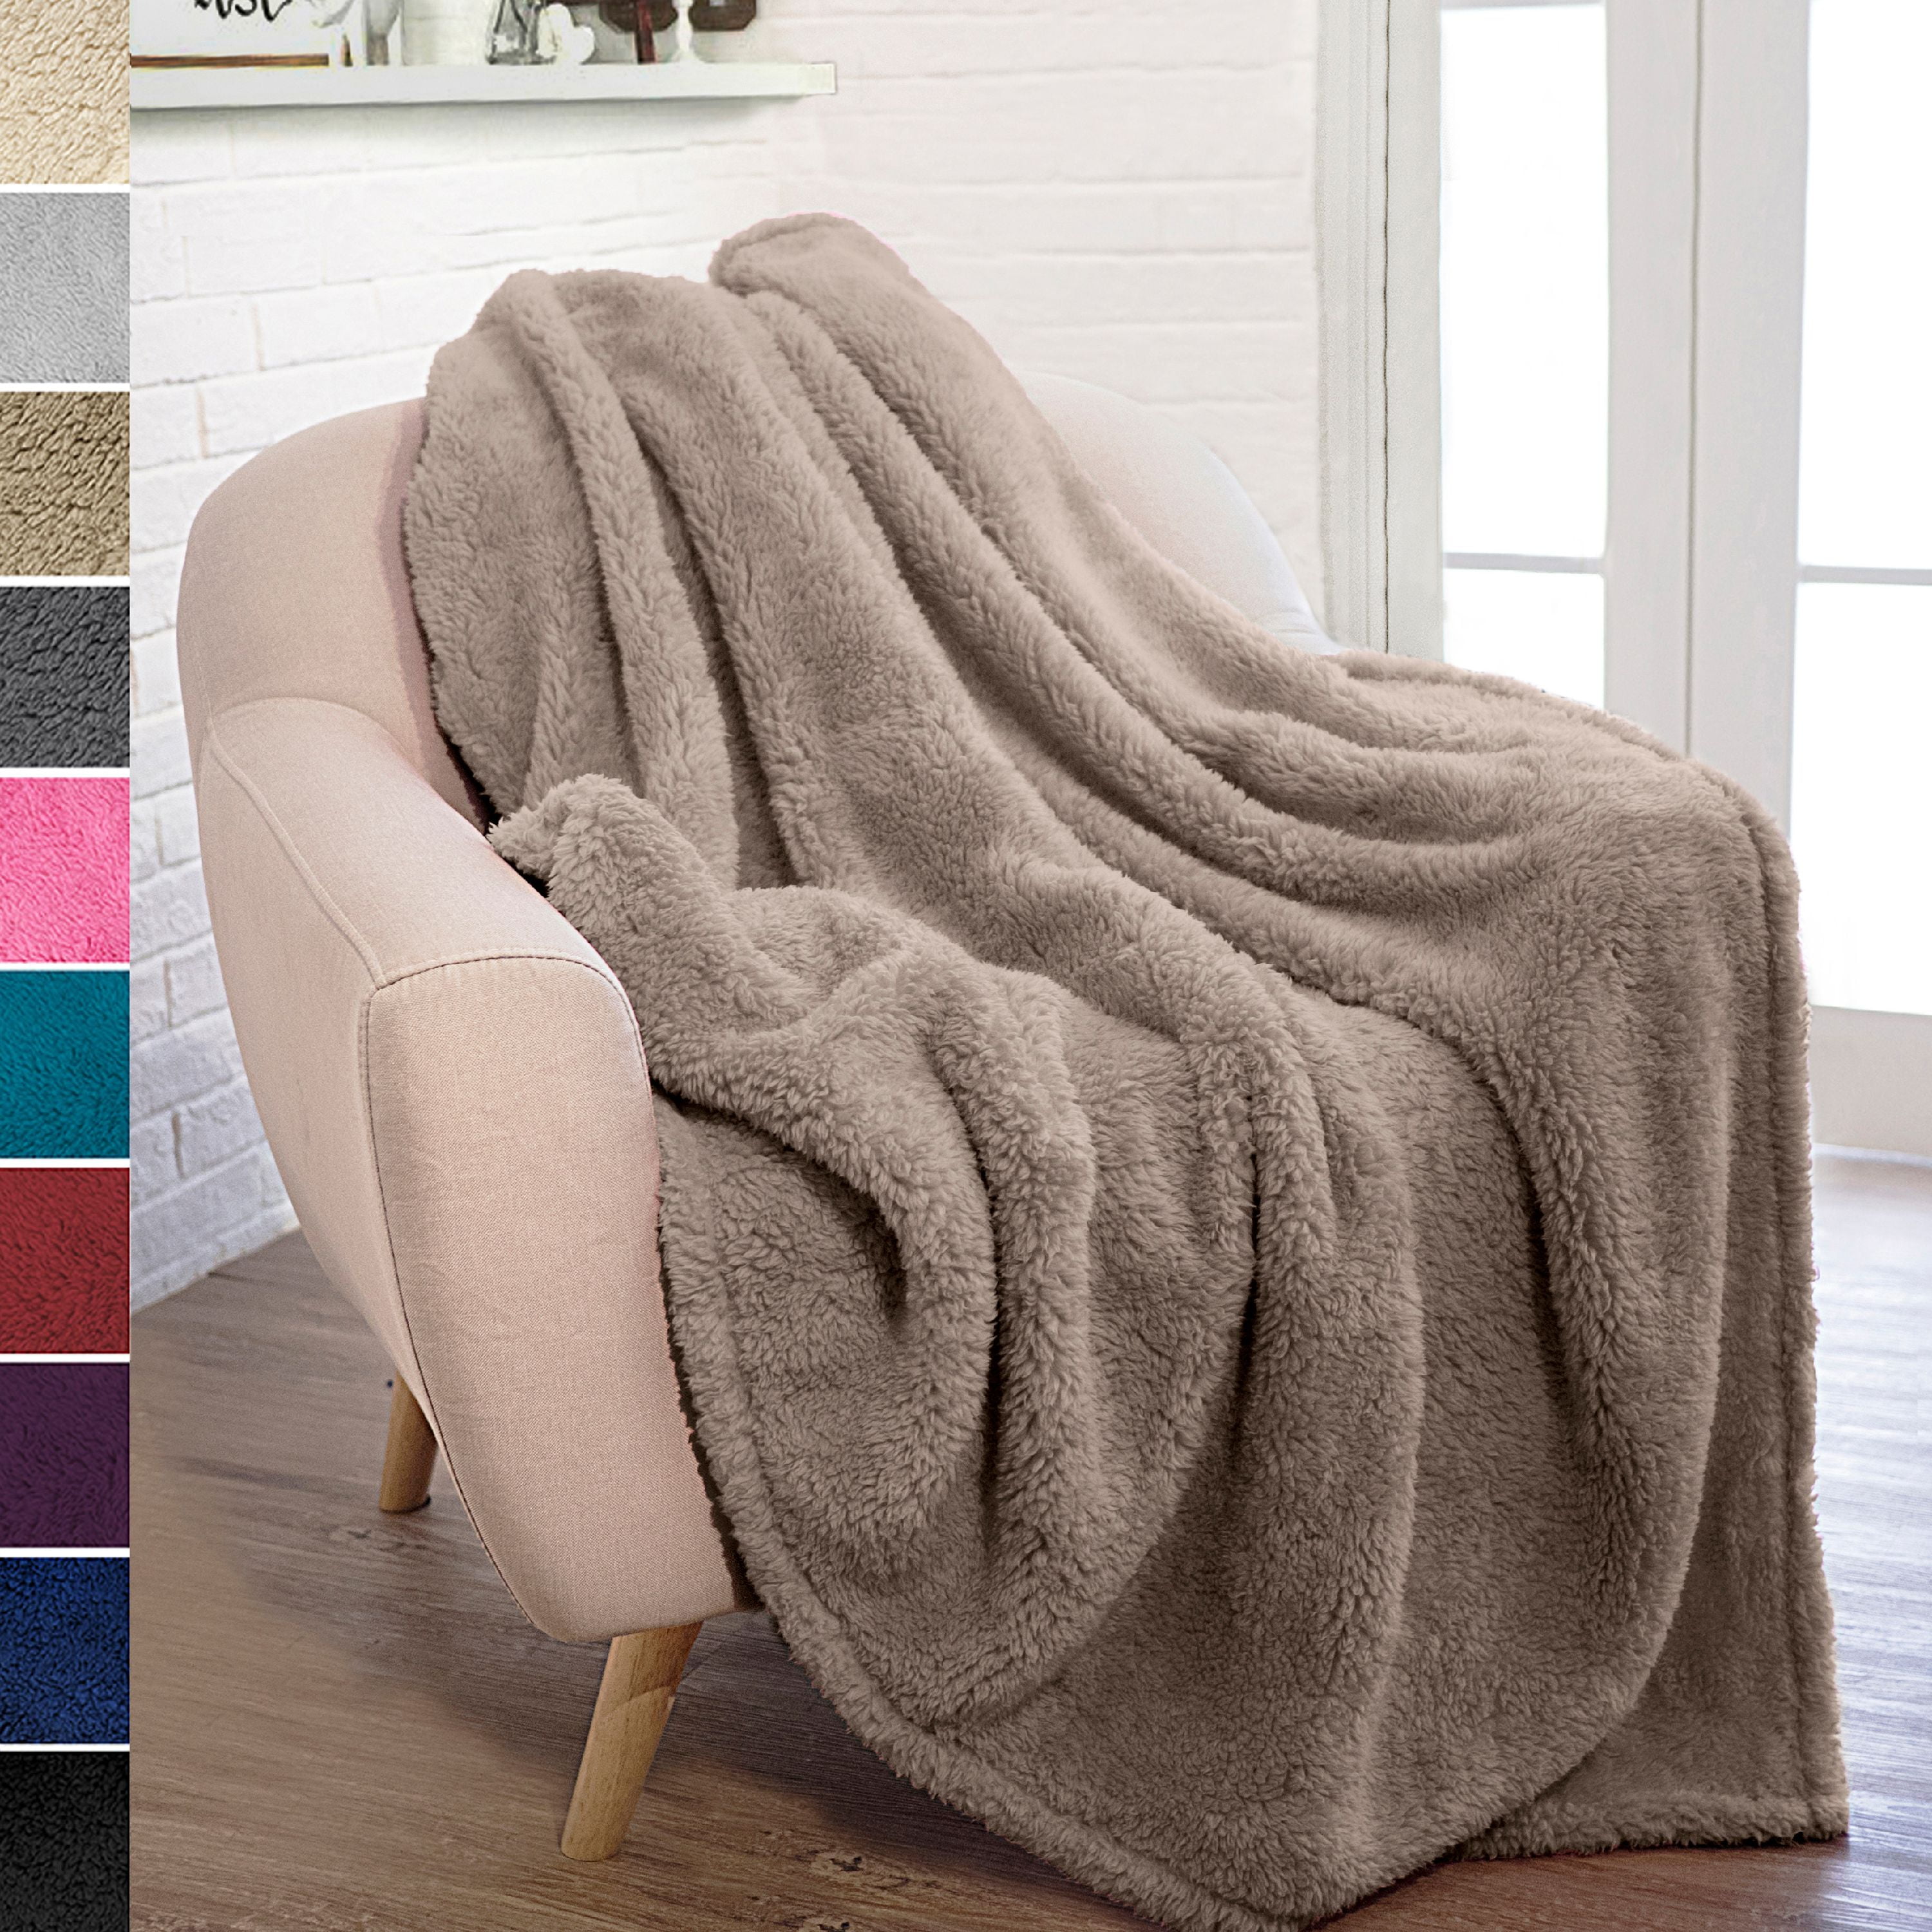 Details about   Ultra Soft Cozy Sherpa Throw Blanket Light Weight Warm Decorative Throw Blanket 